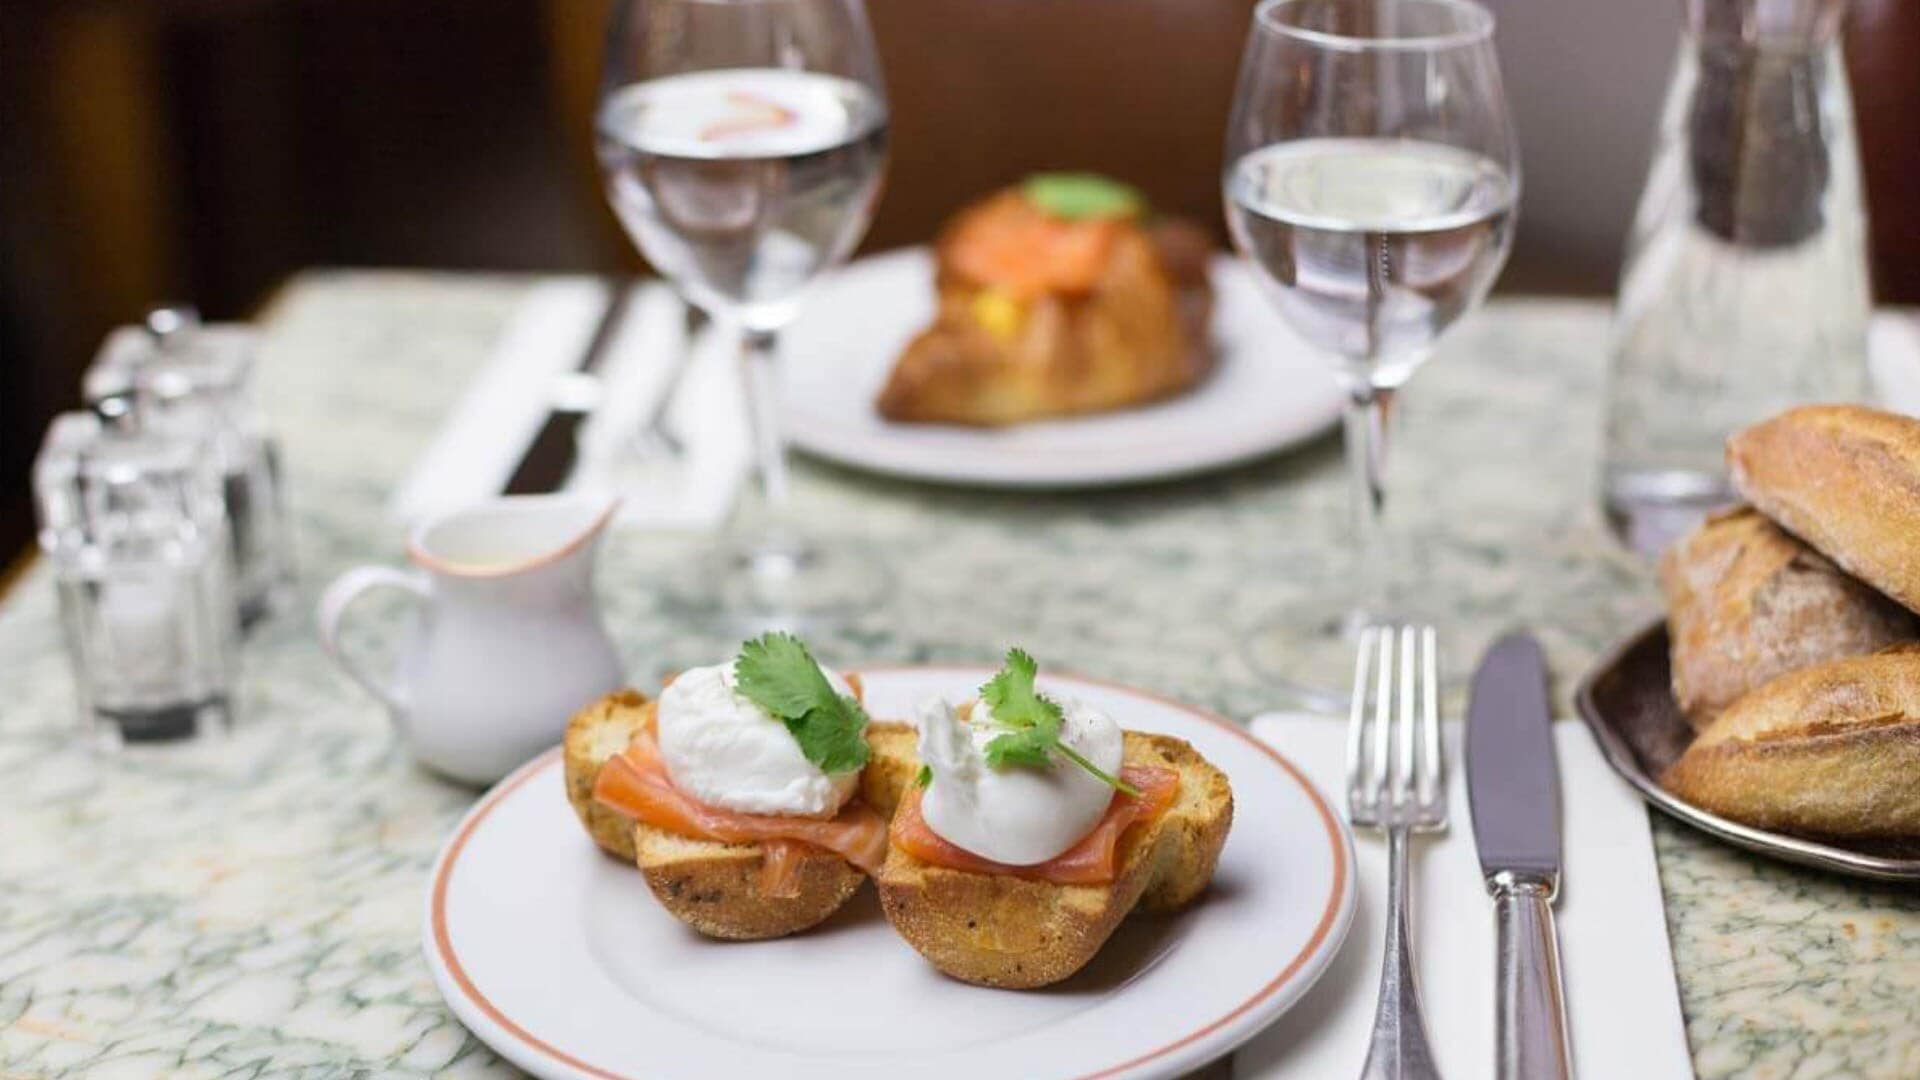 Eggs with smoked salmon on toast, served with tea for high tea in Singapore at Angelina